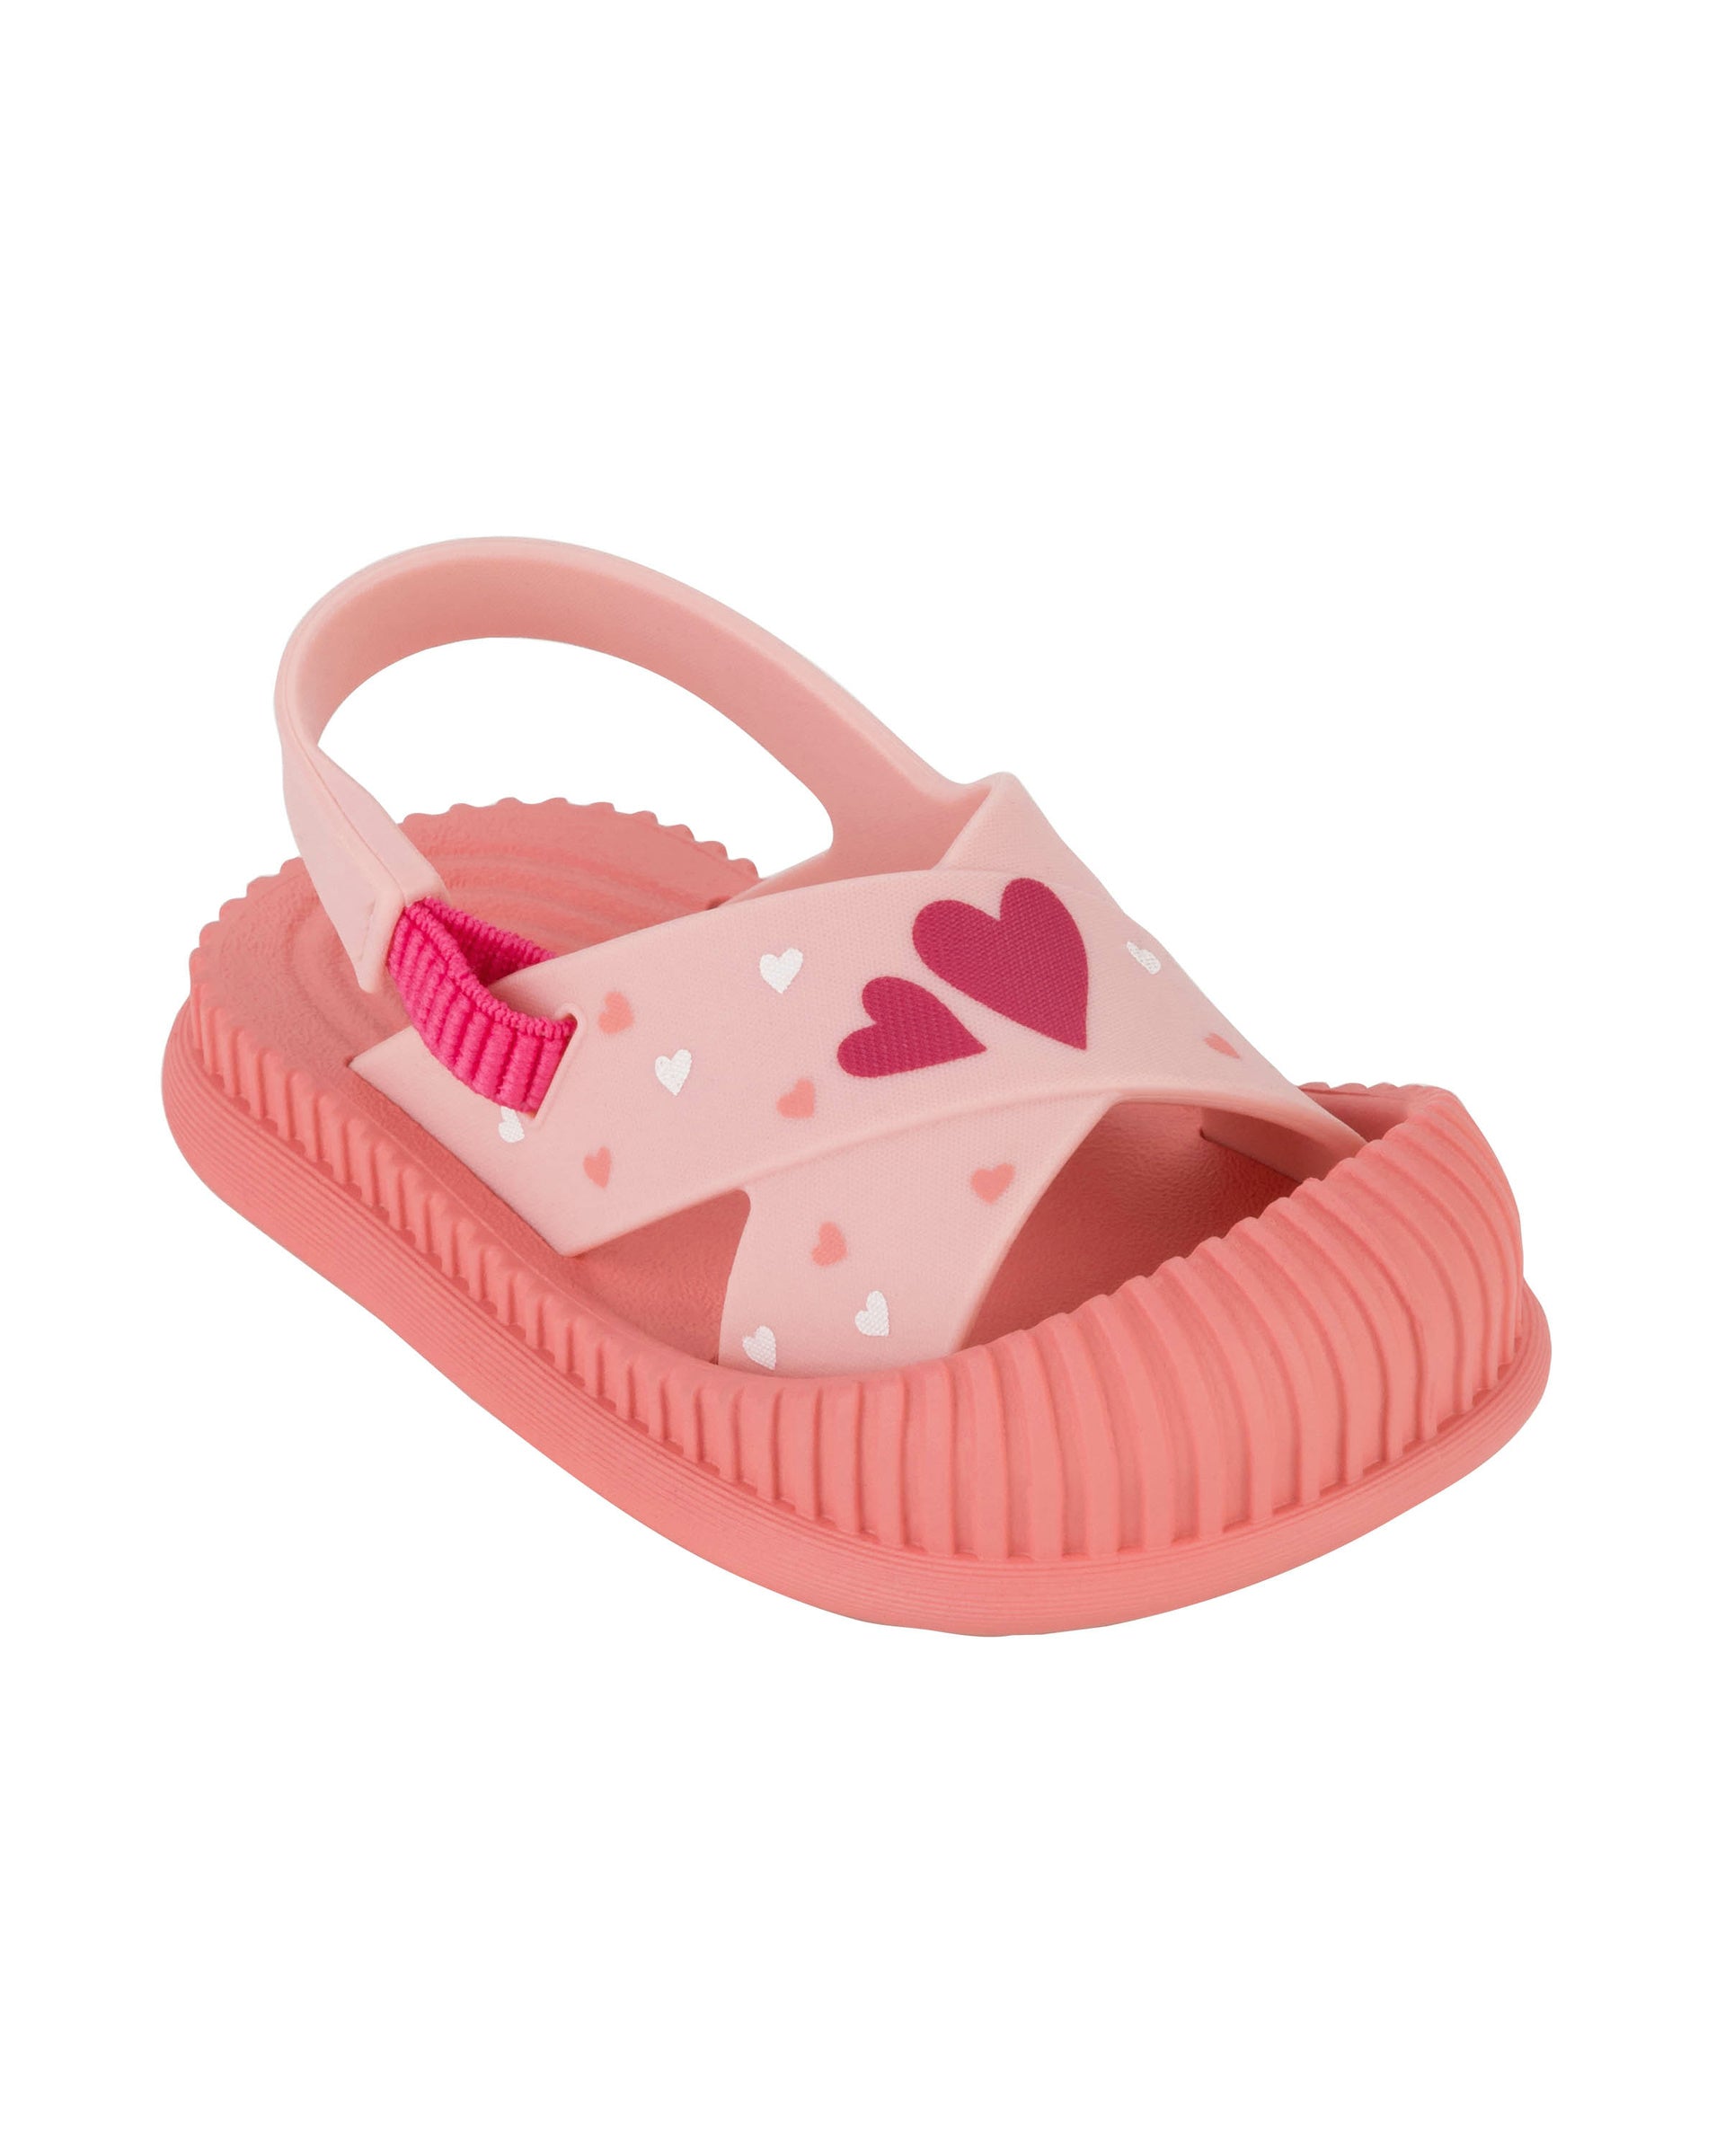 Angled view of a pink Ipanema Cute baby sandal with hearts on the strap.